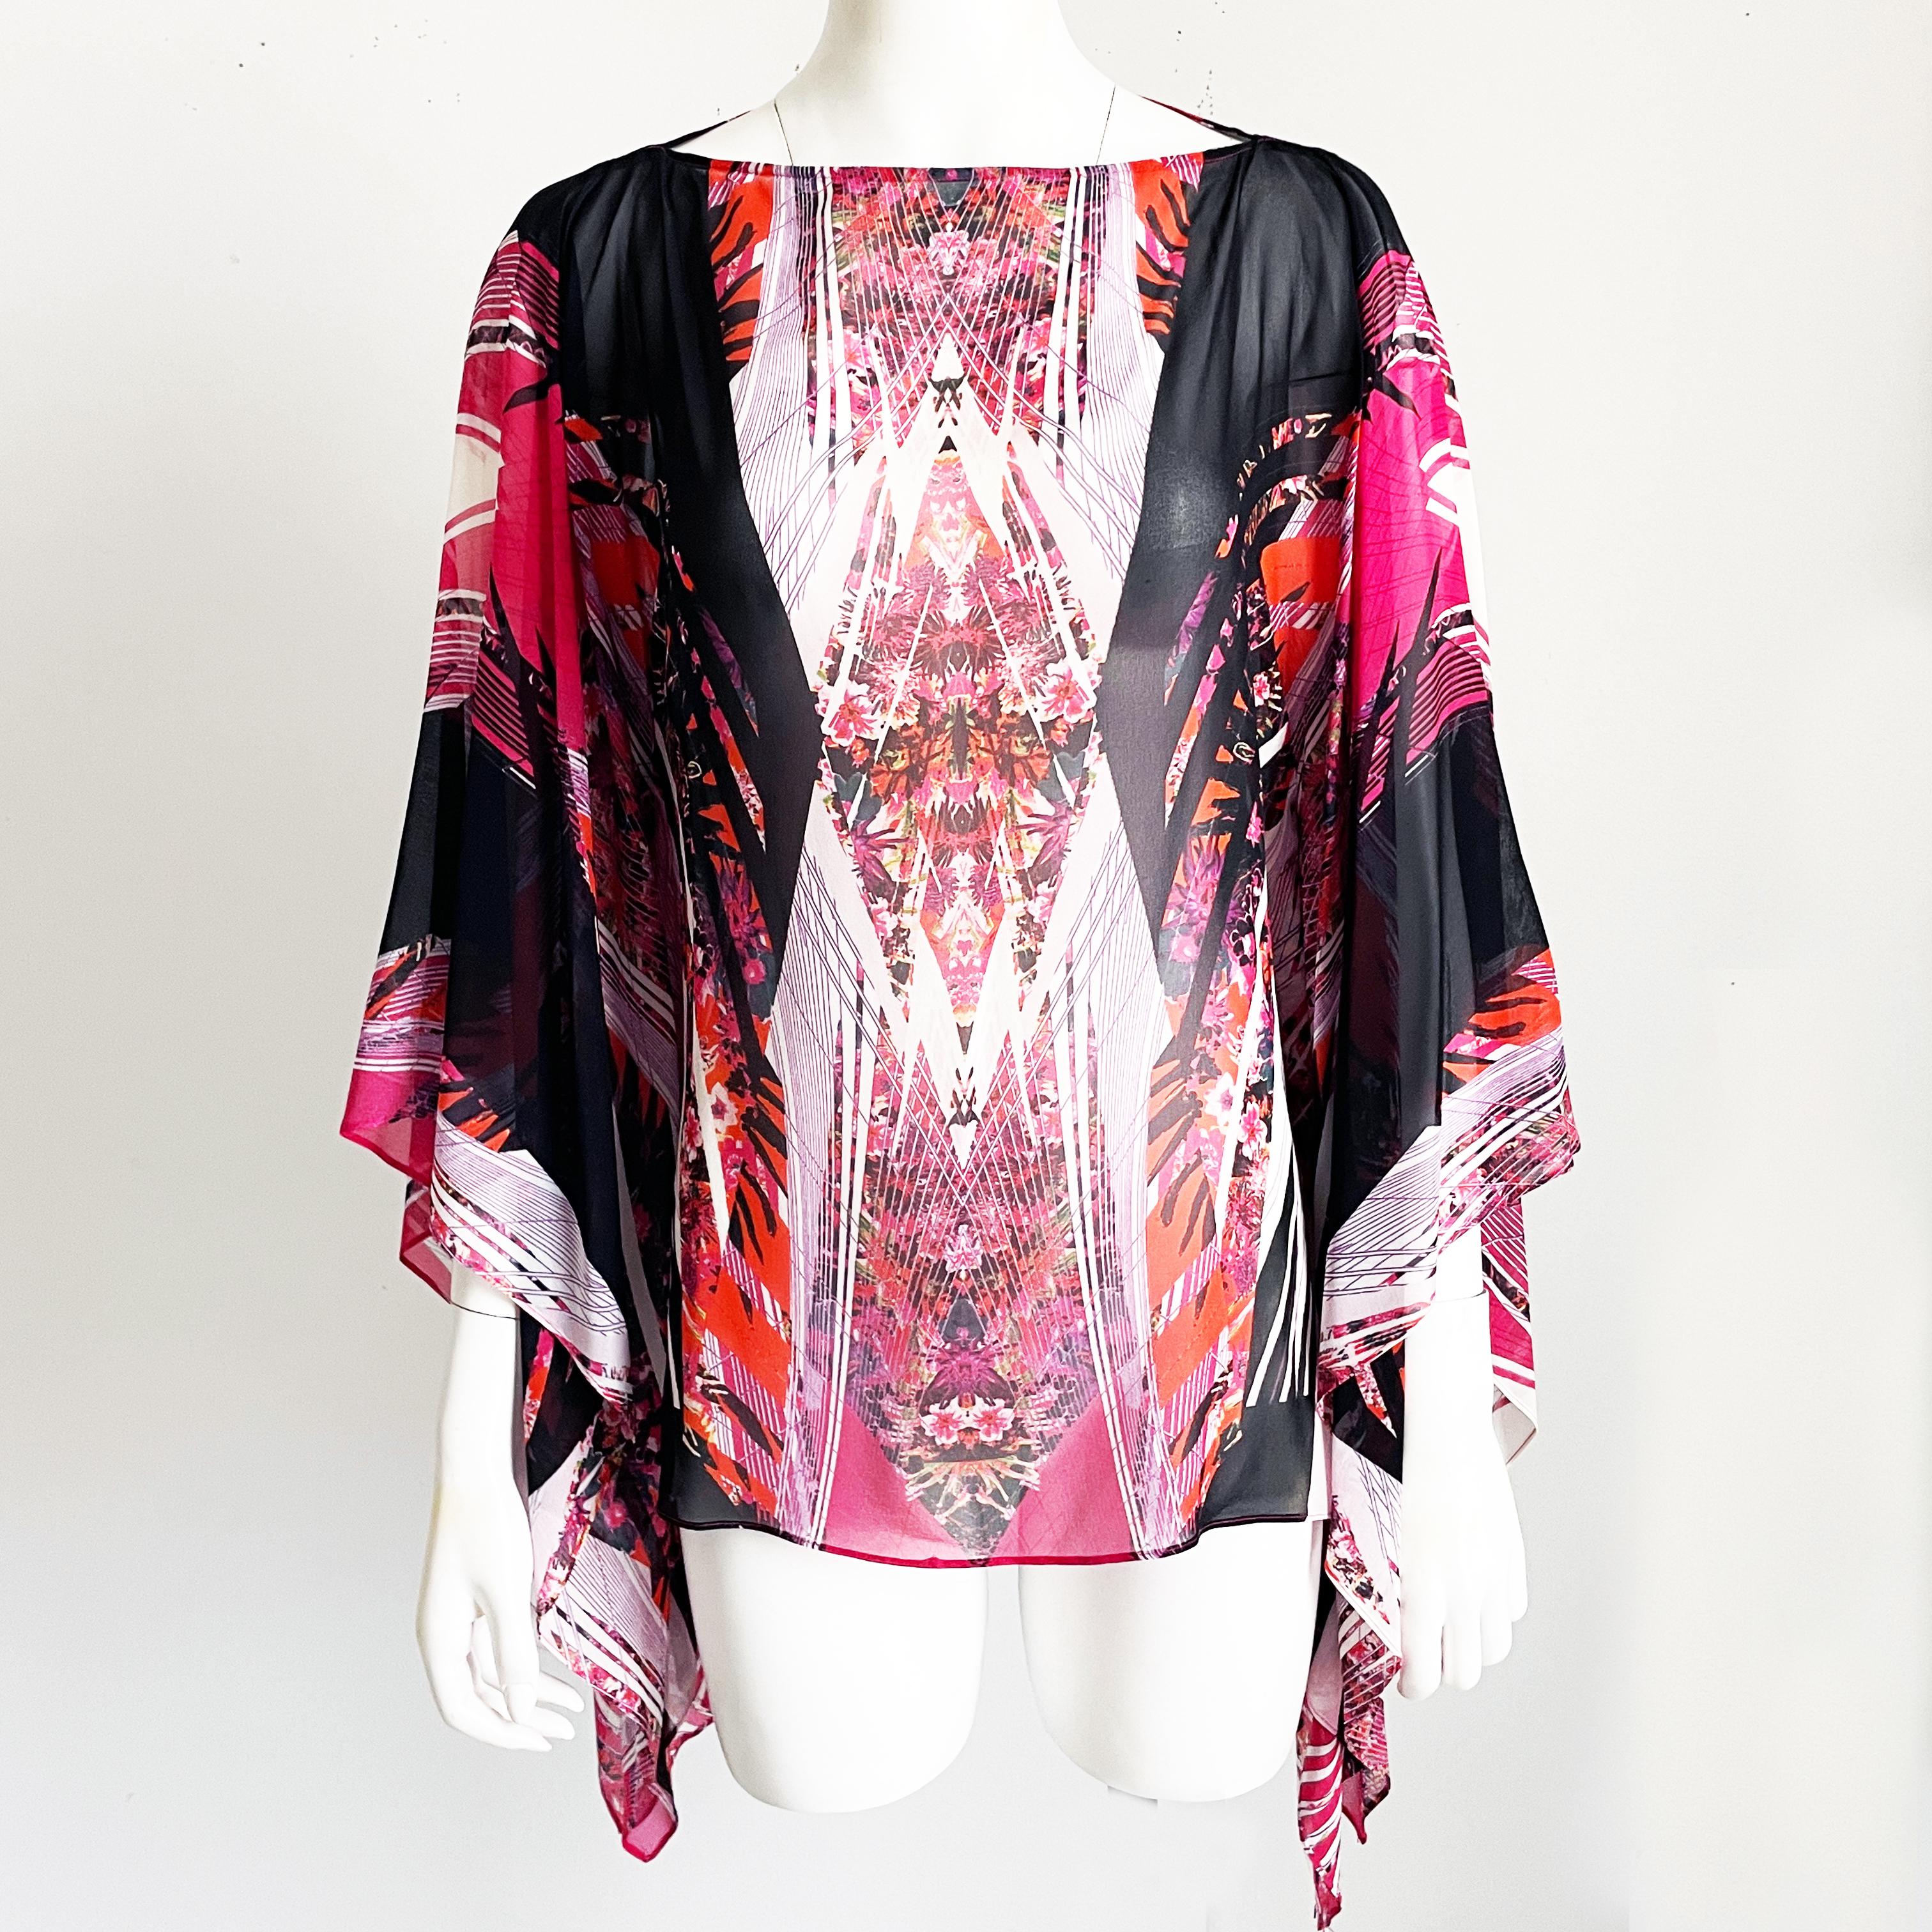 Roberto Cavalli Silk Caftan Blouse with Belt Abstract Print Angel Sleeve OSFM In Good Condition For Sale In Port Saint Lucie, FL